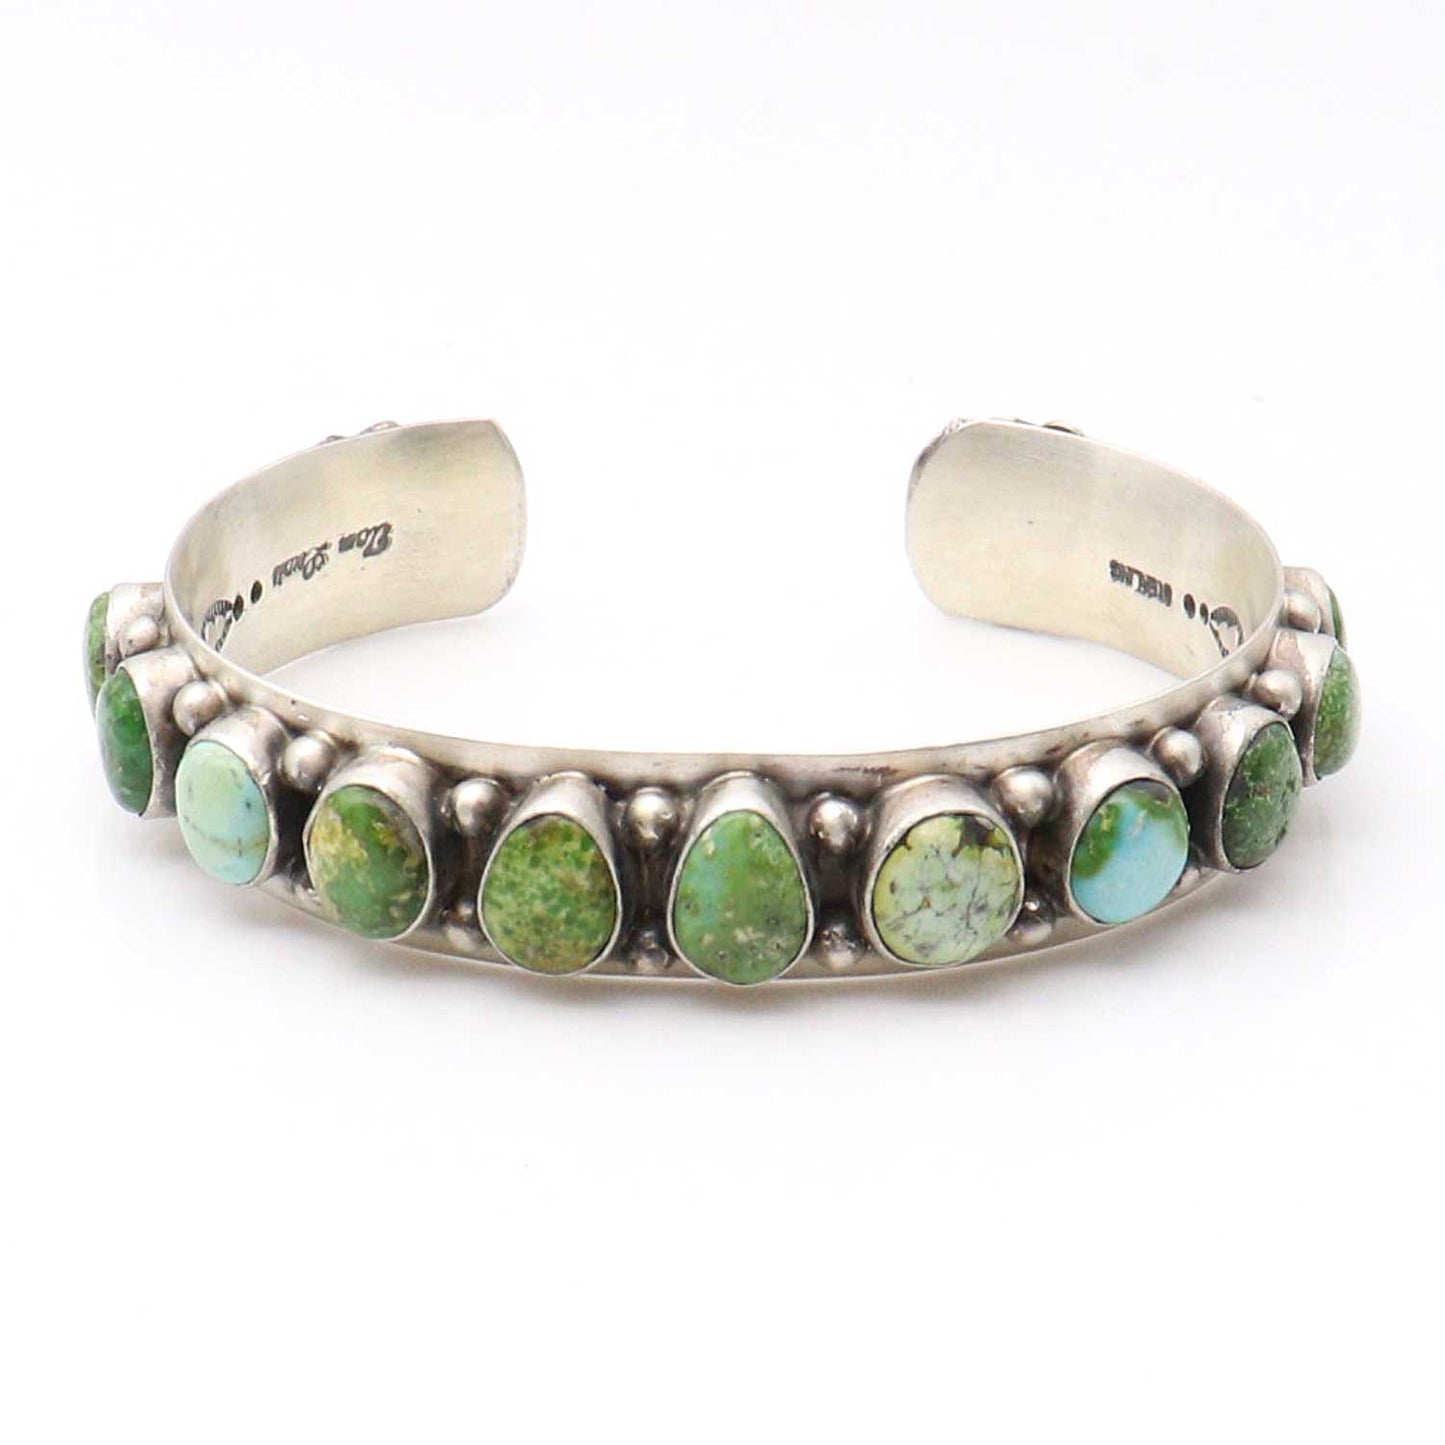 Sonoran Gold Turquoise Bracelet by Tom Lewis